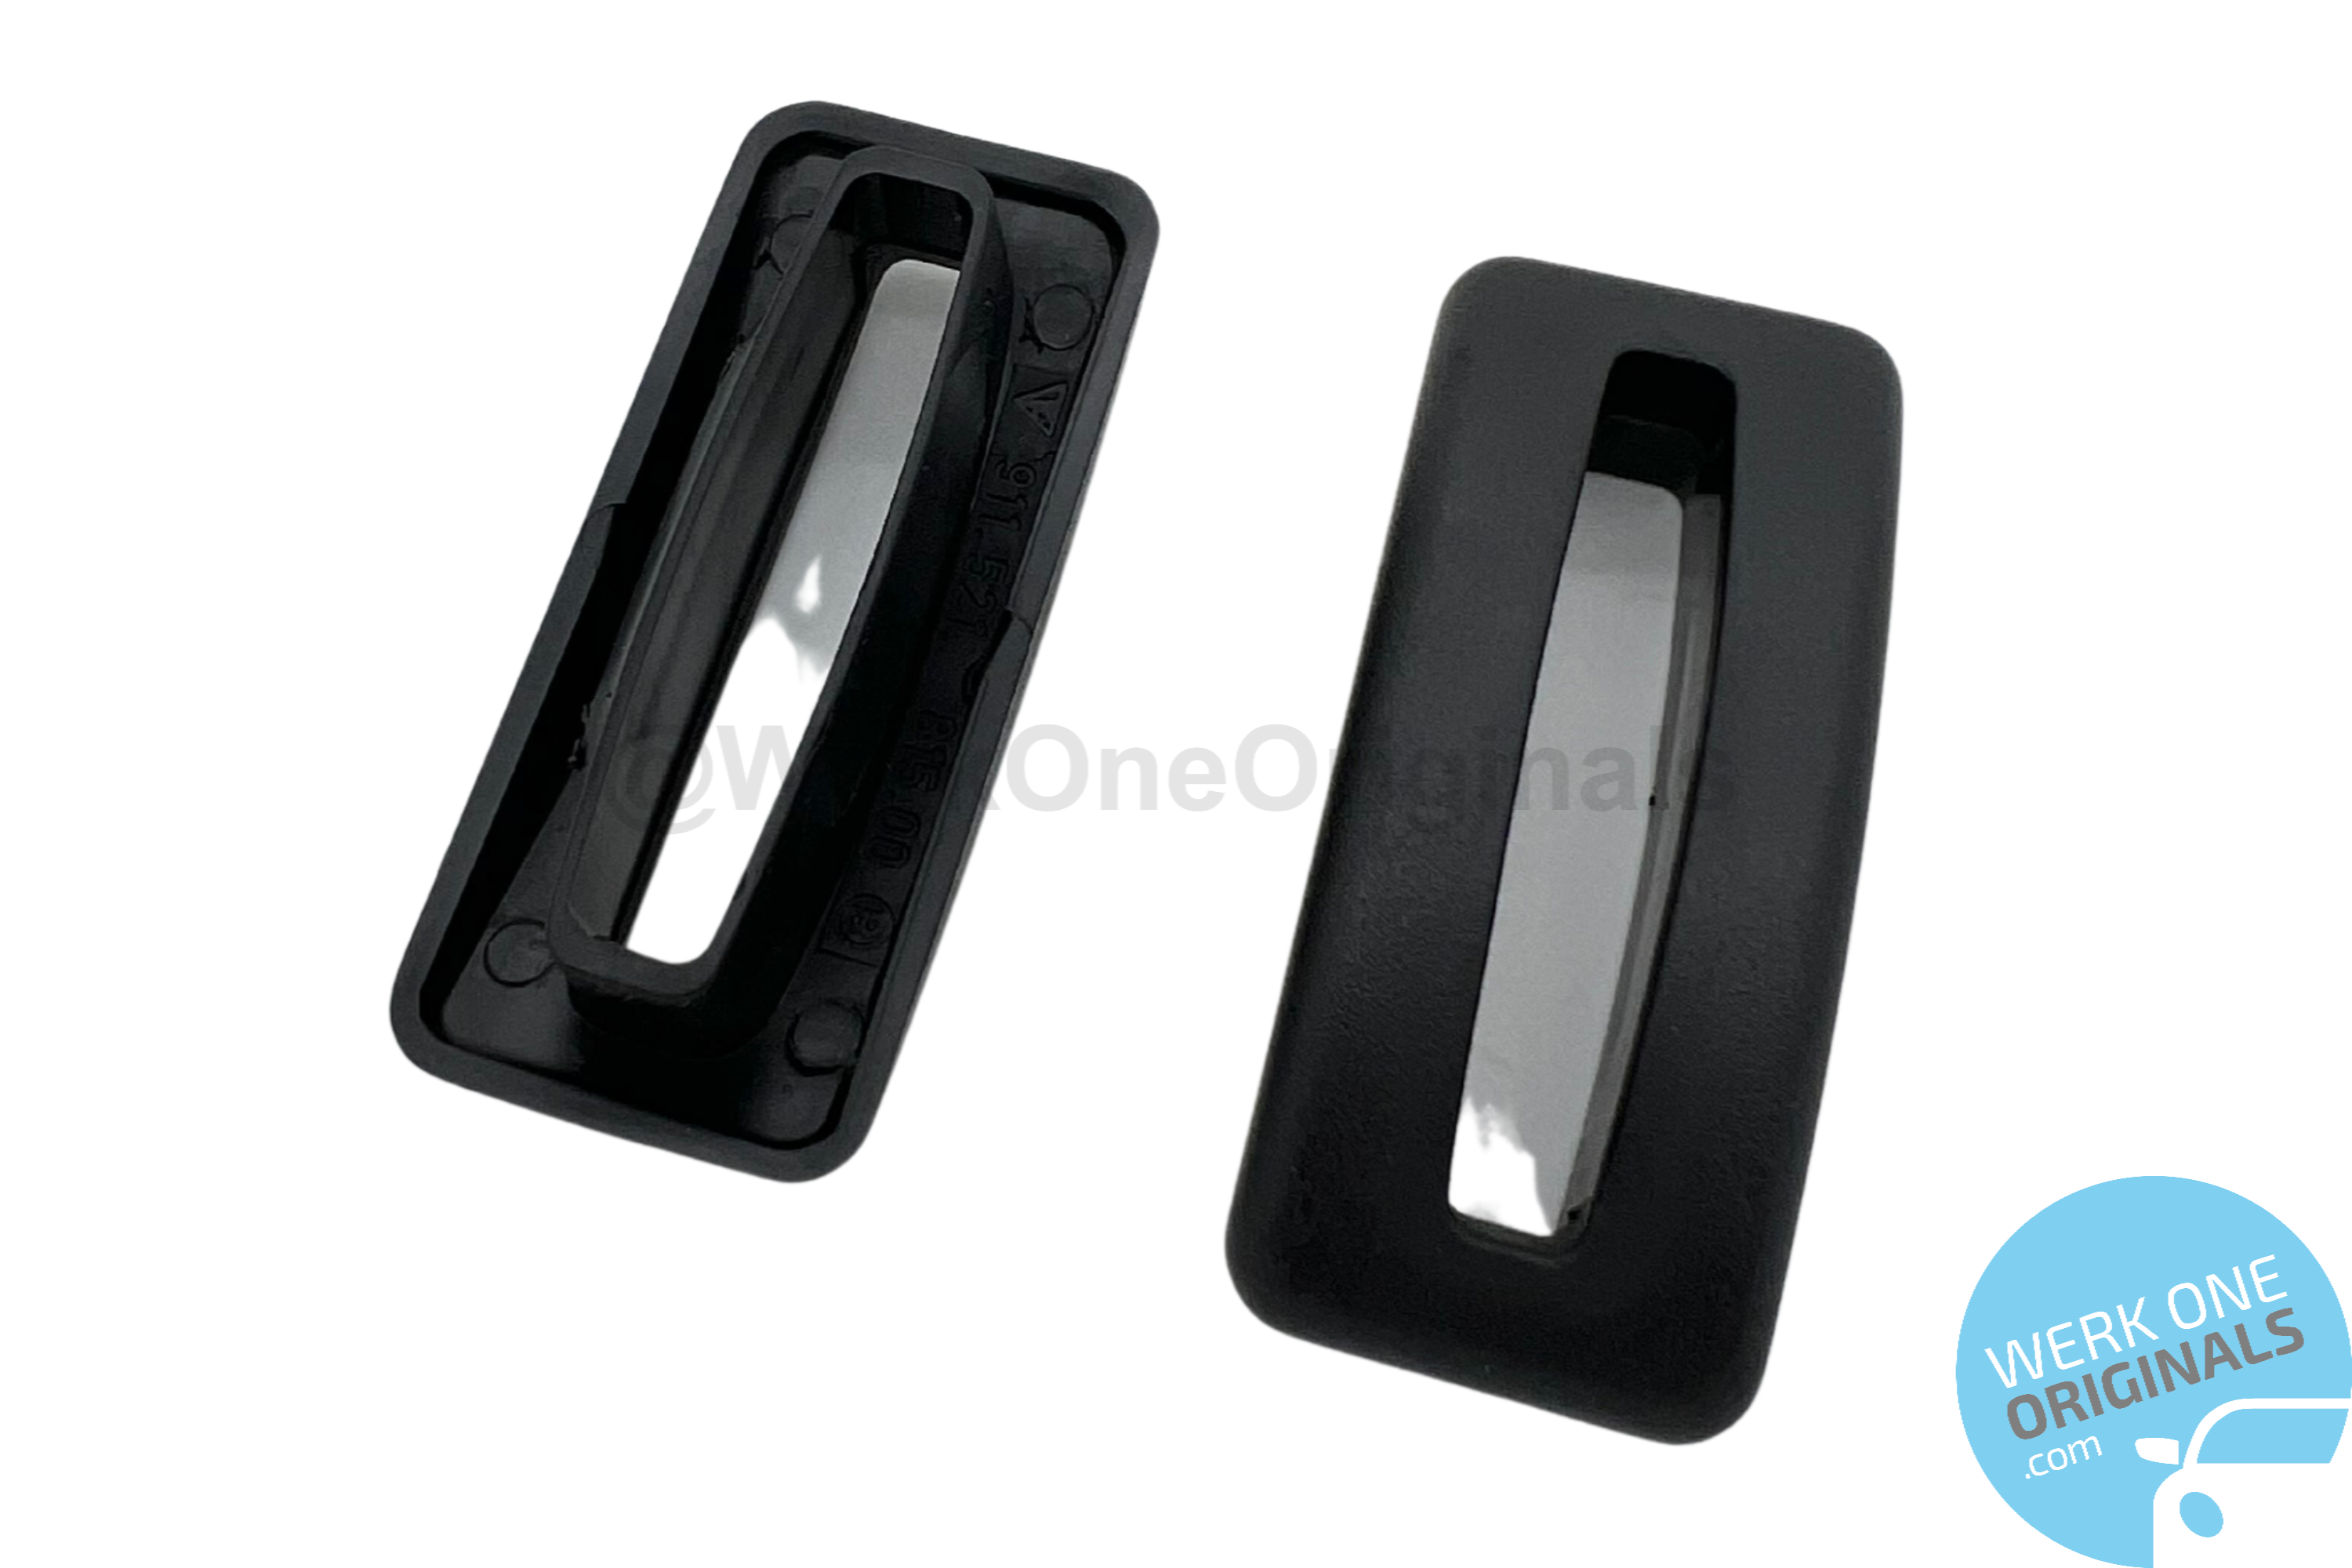 Porsche Genuine Seat Back Release Trim Pair for 911 Type 993 Models